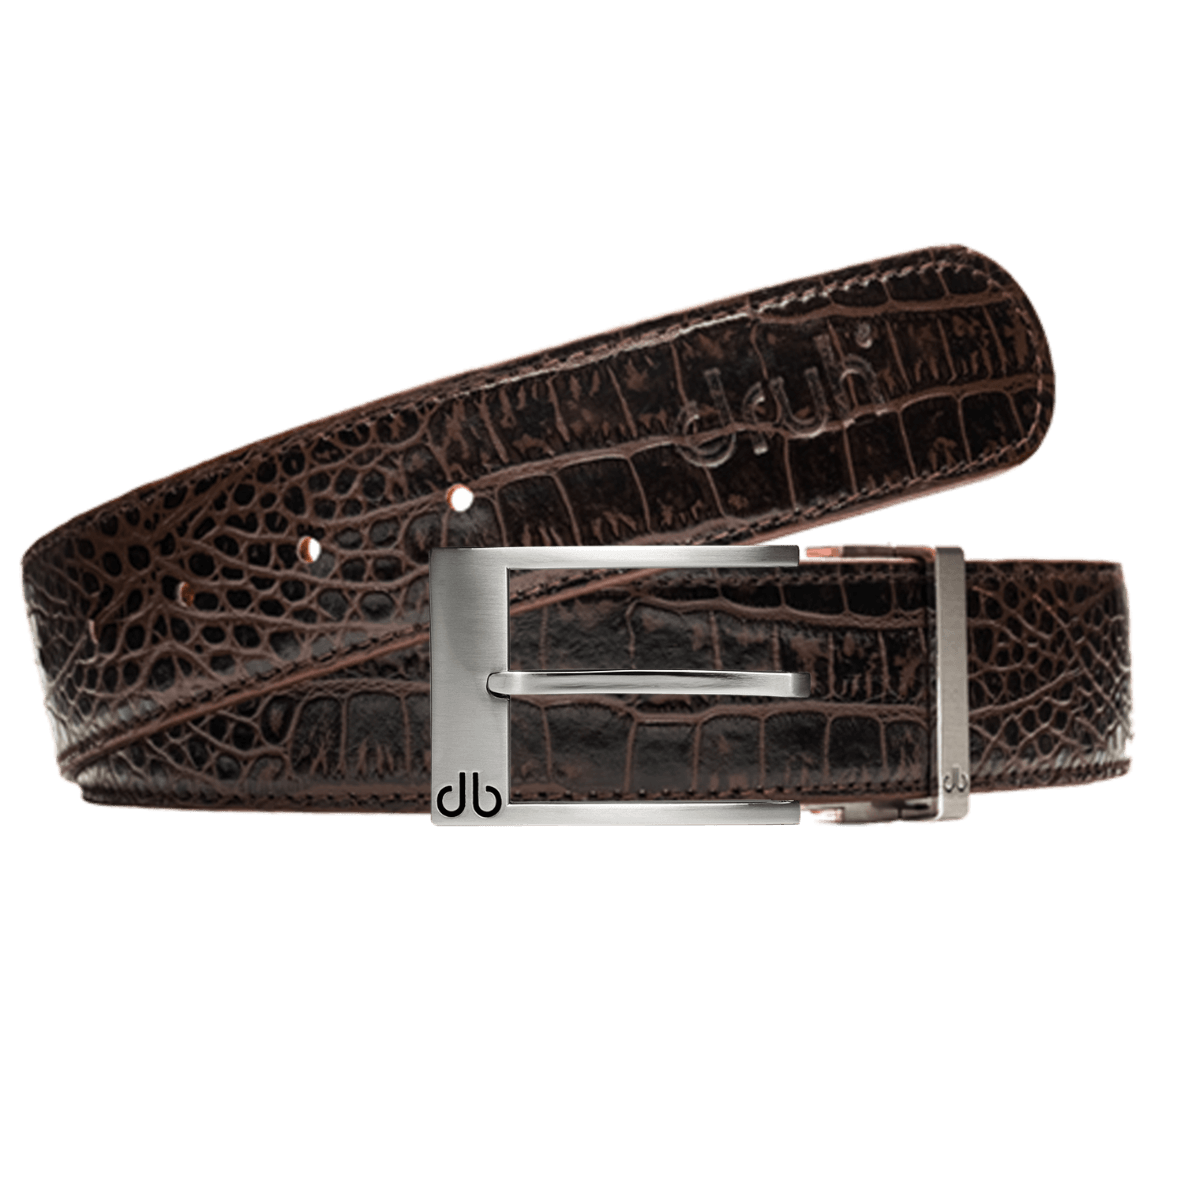 Brown crocodile leather strap with Silver prong buckle